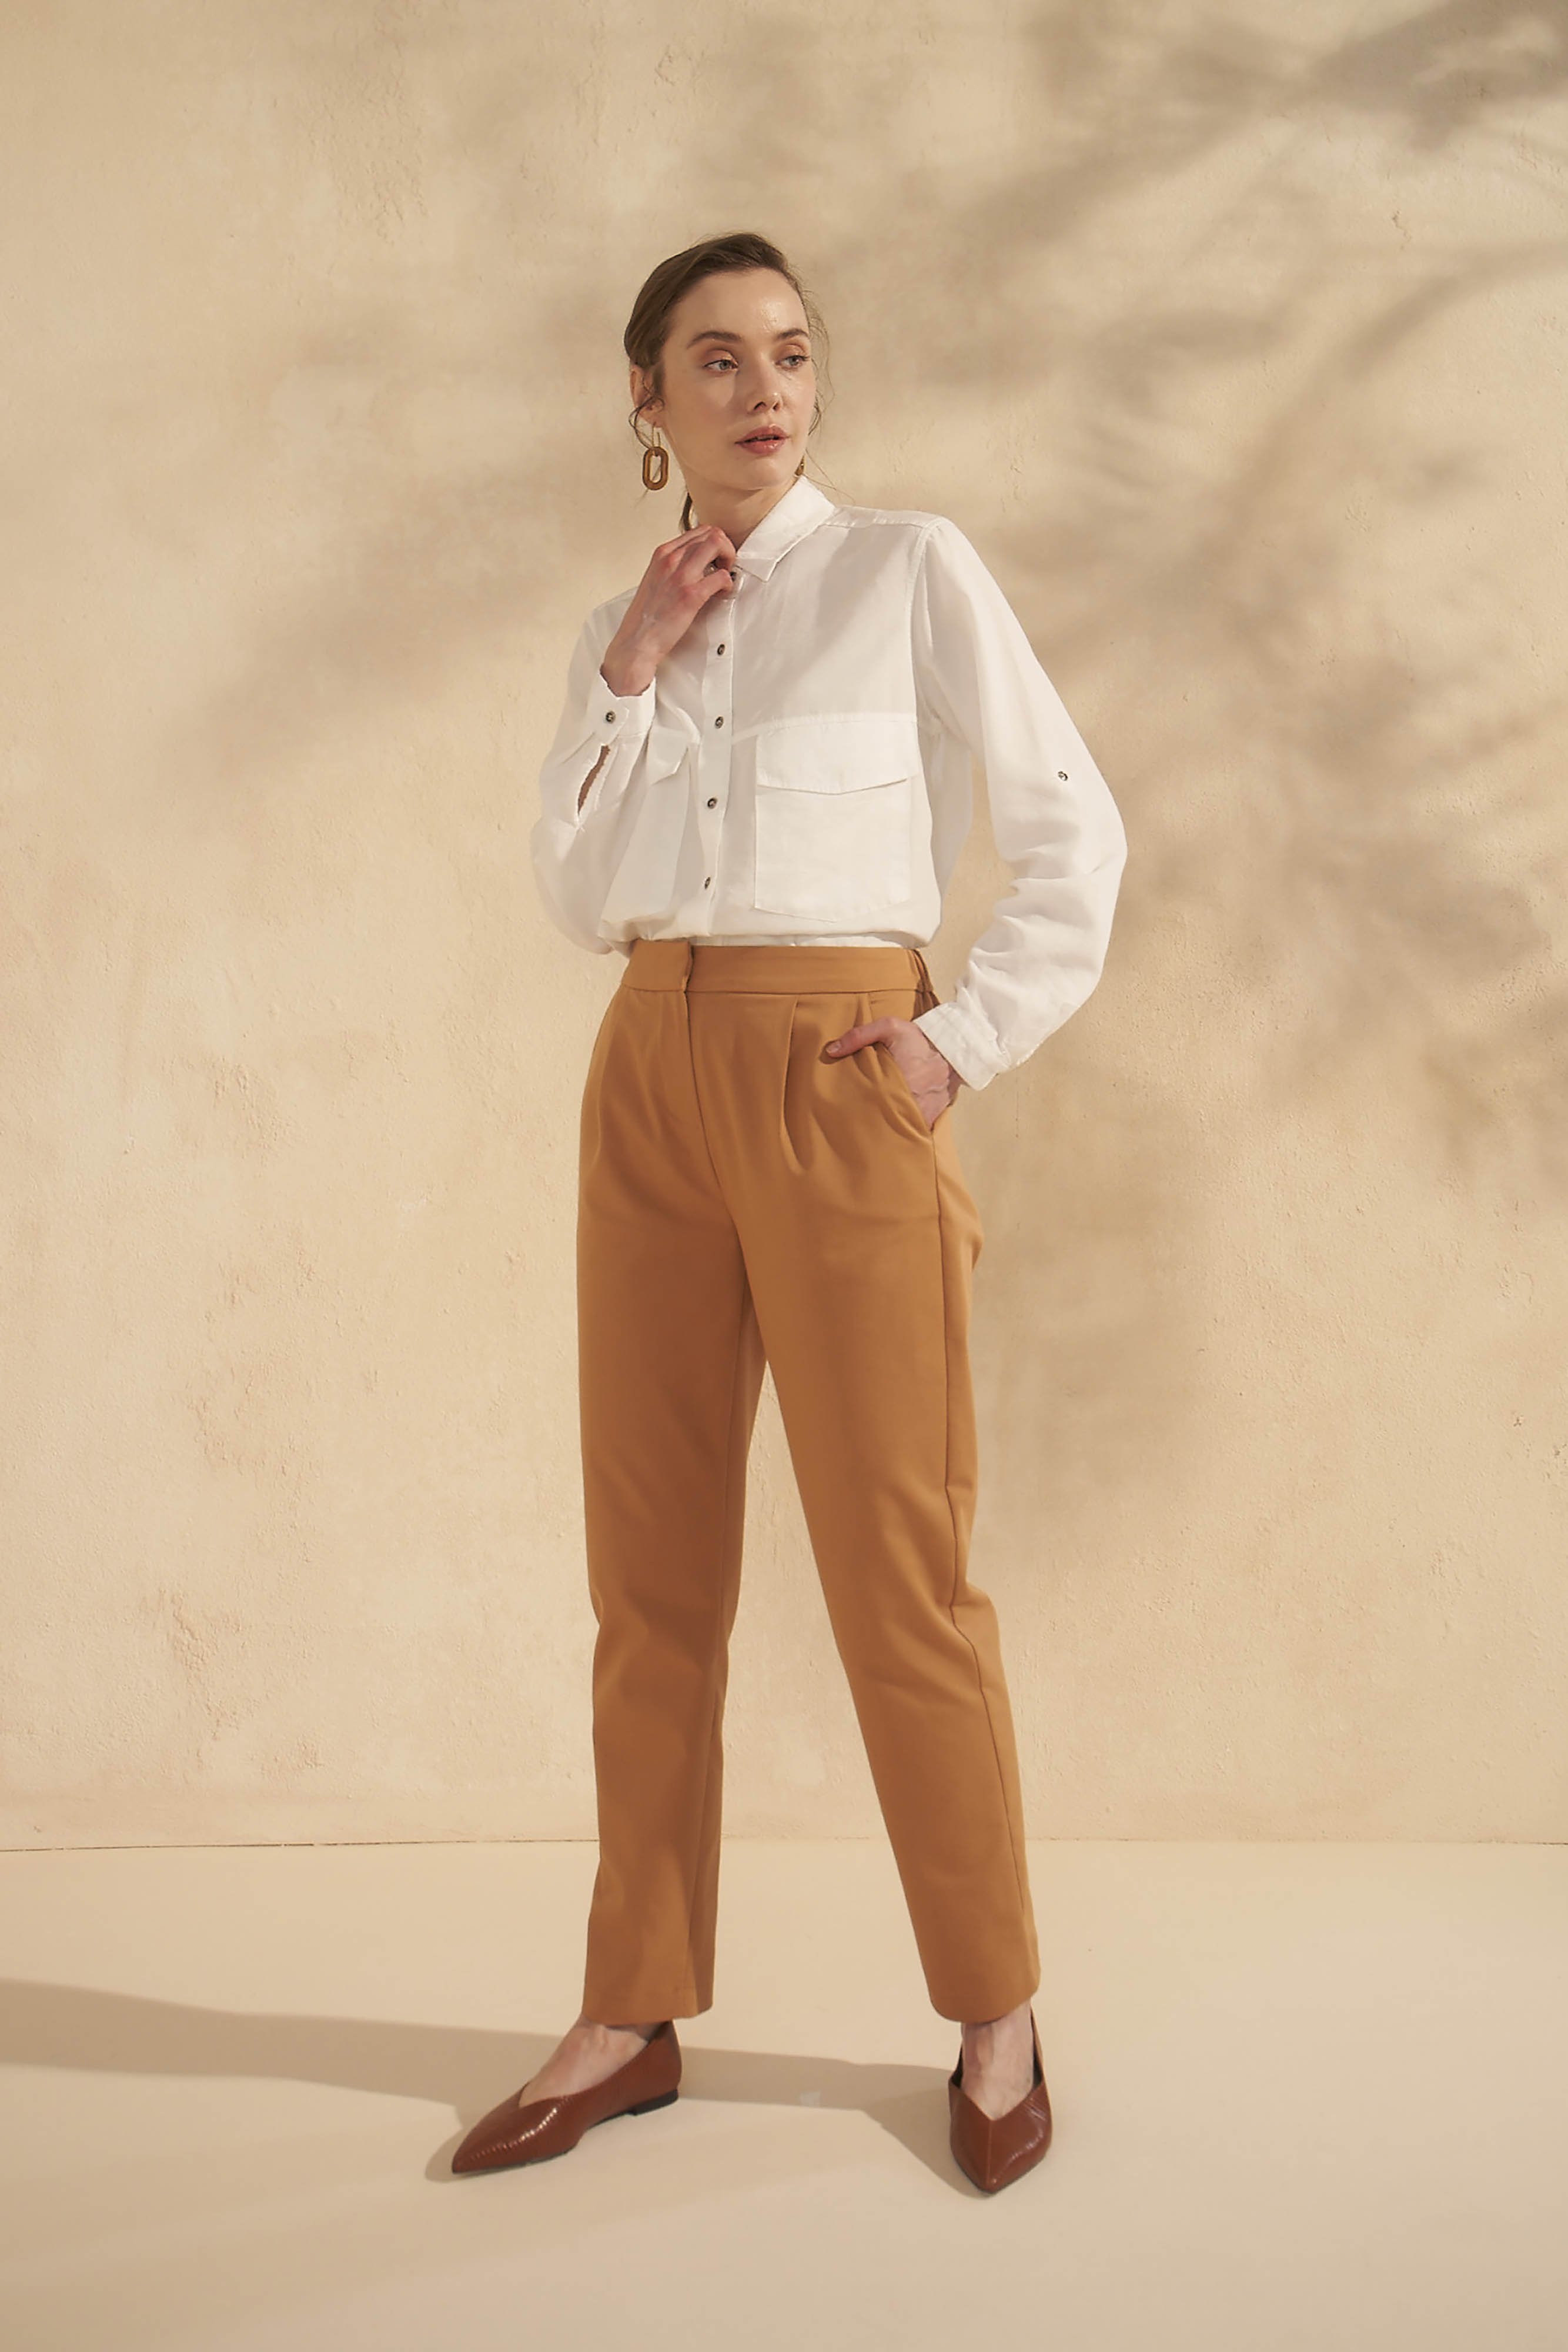 Coral Pants With Tan